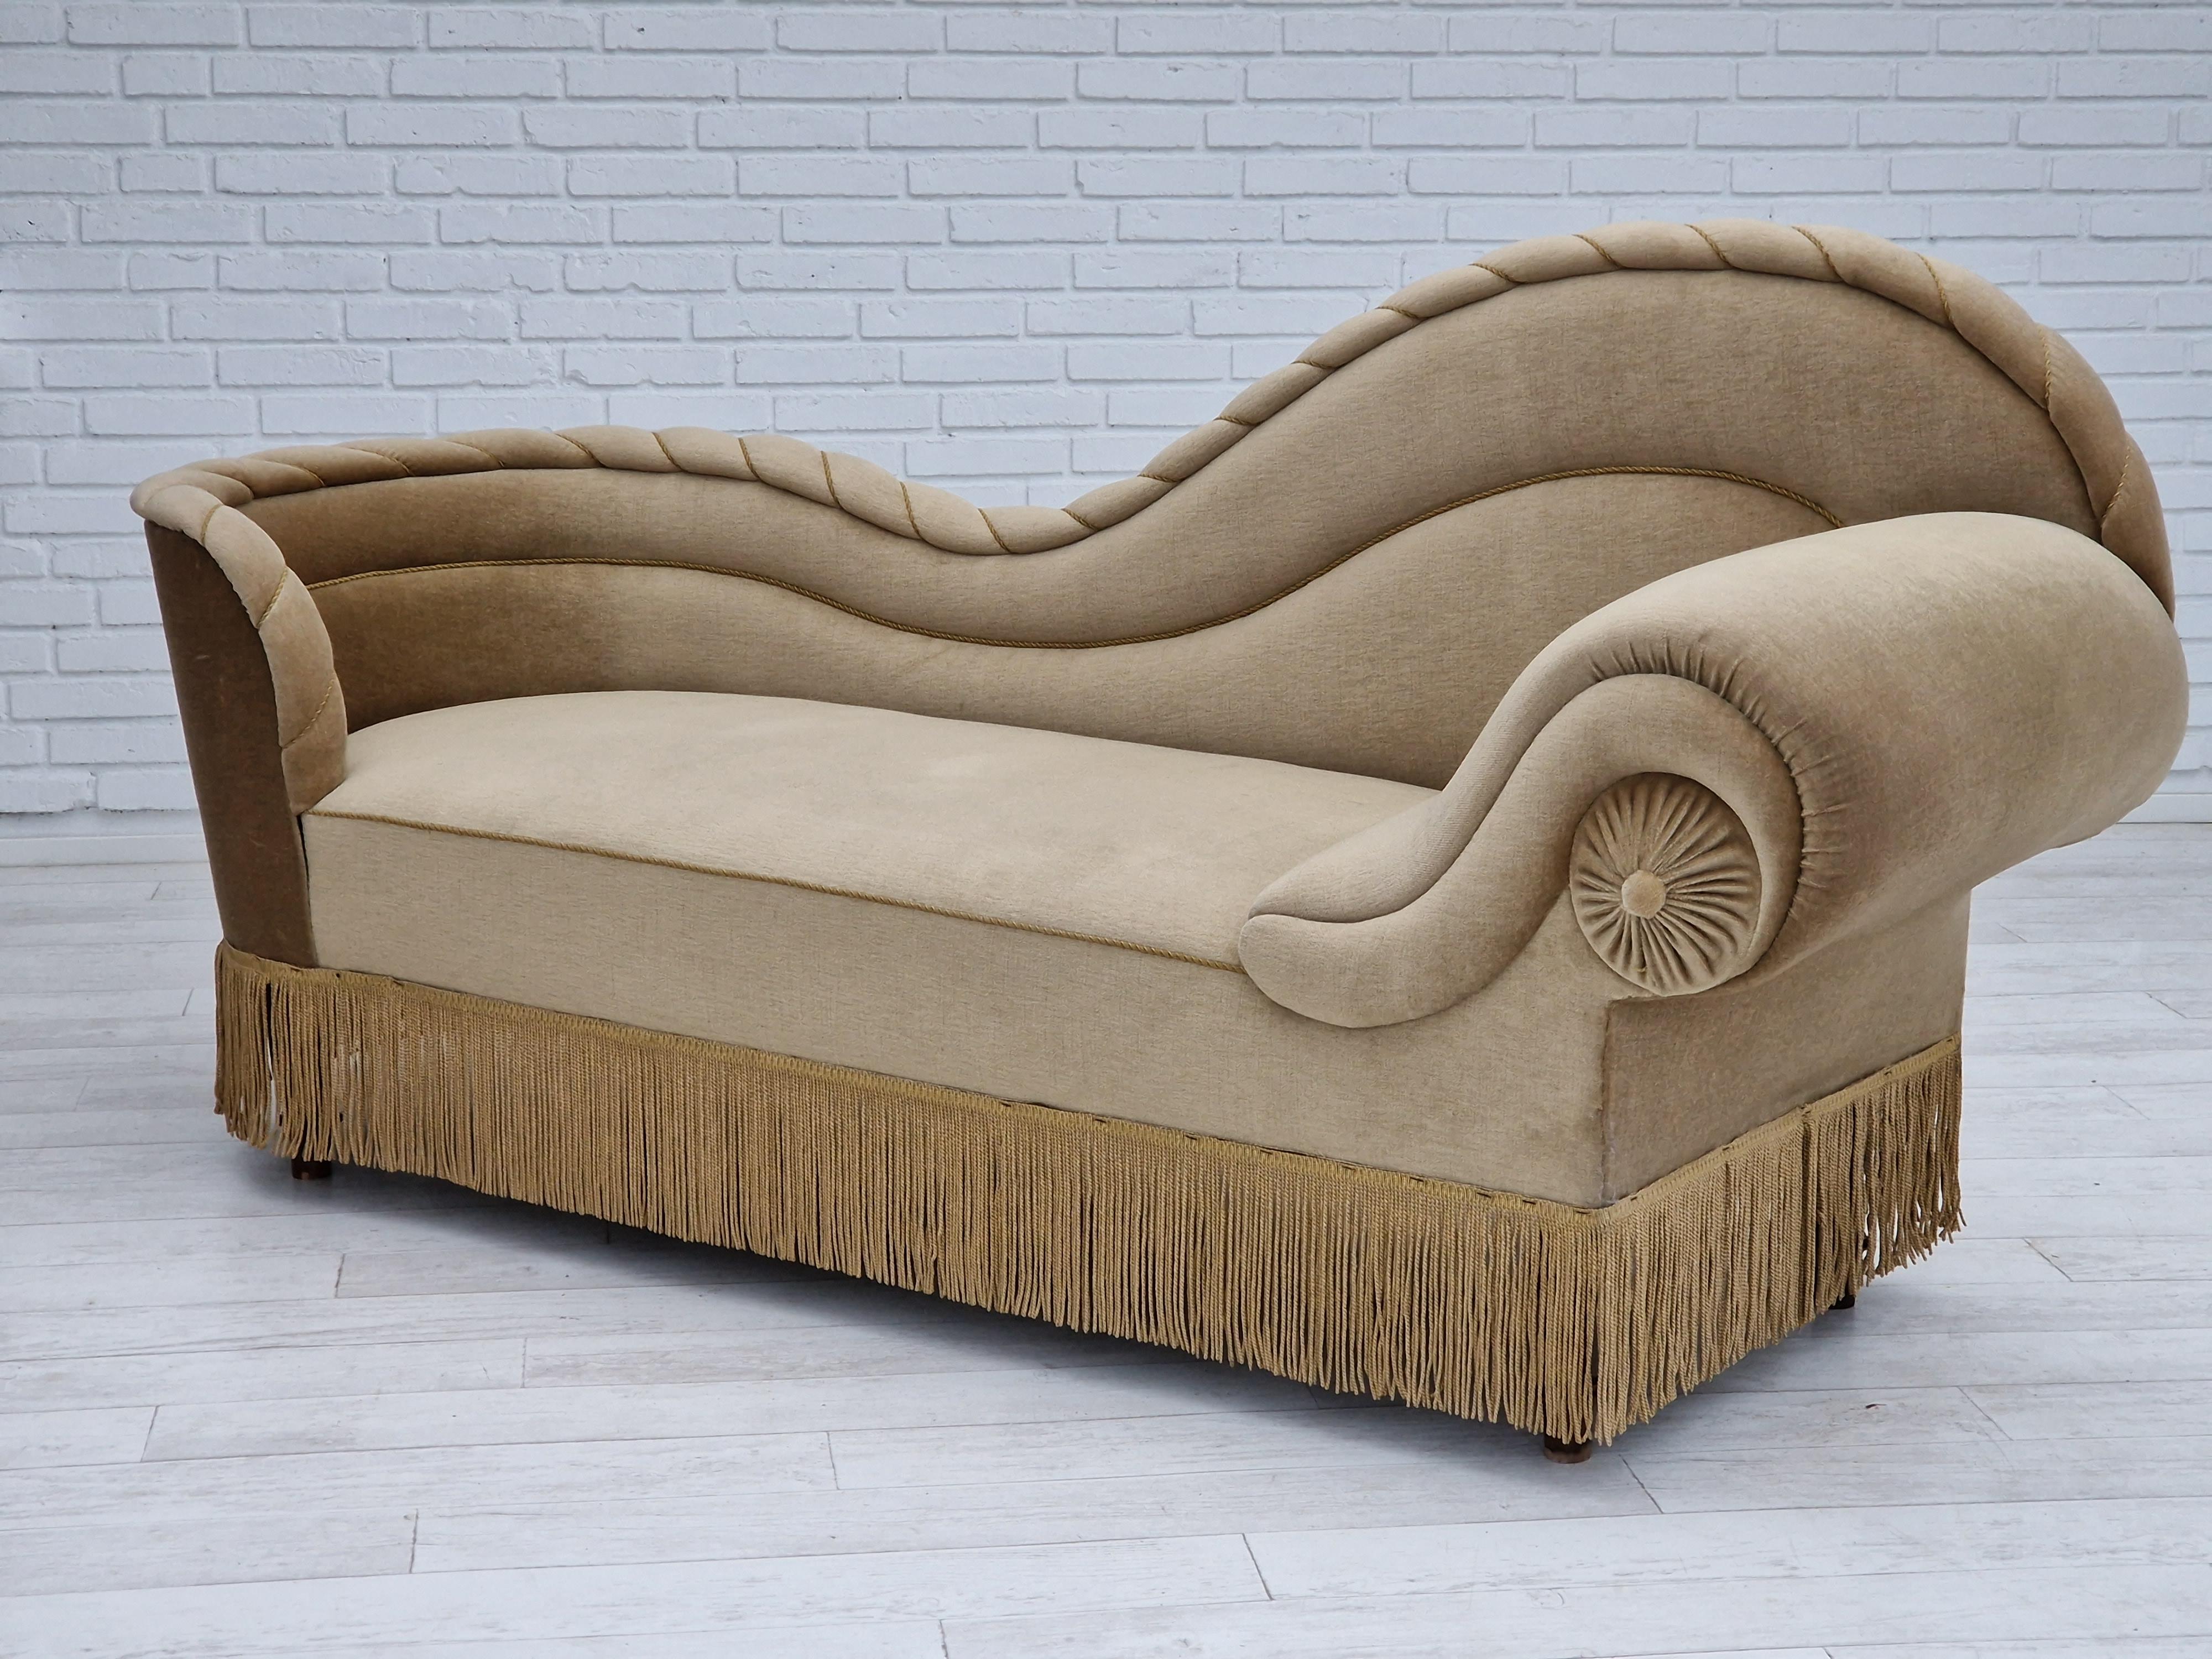 1960s, Danish Chaiselongue / Daybed, Original Very Good Condition 7